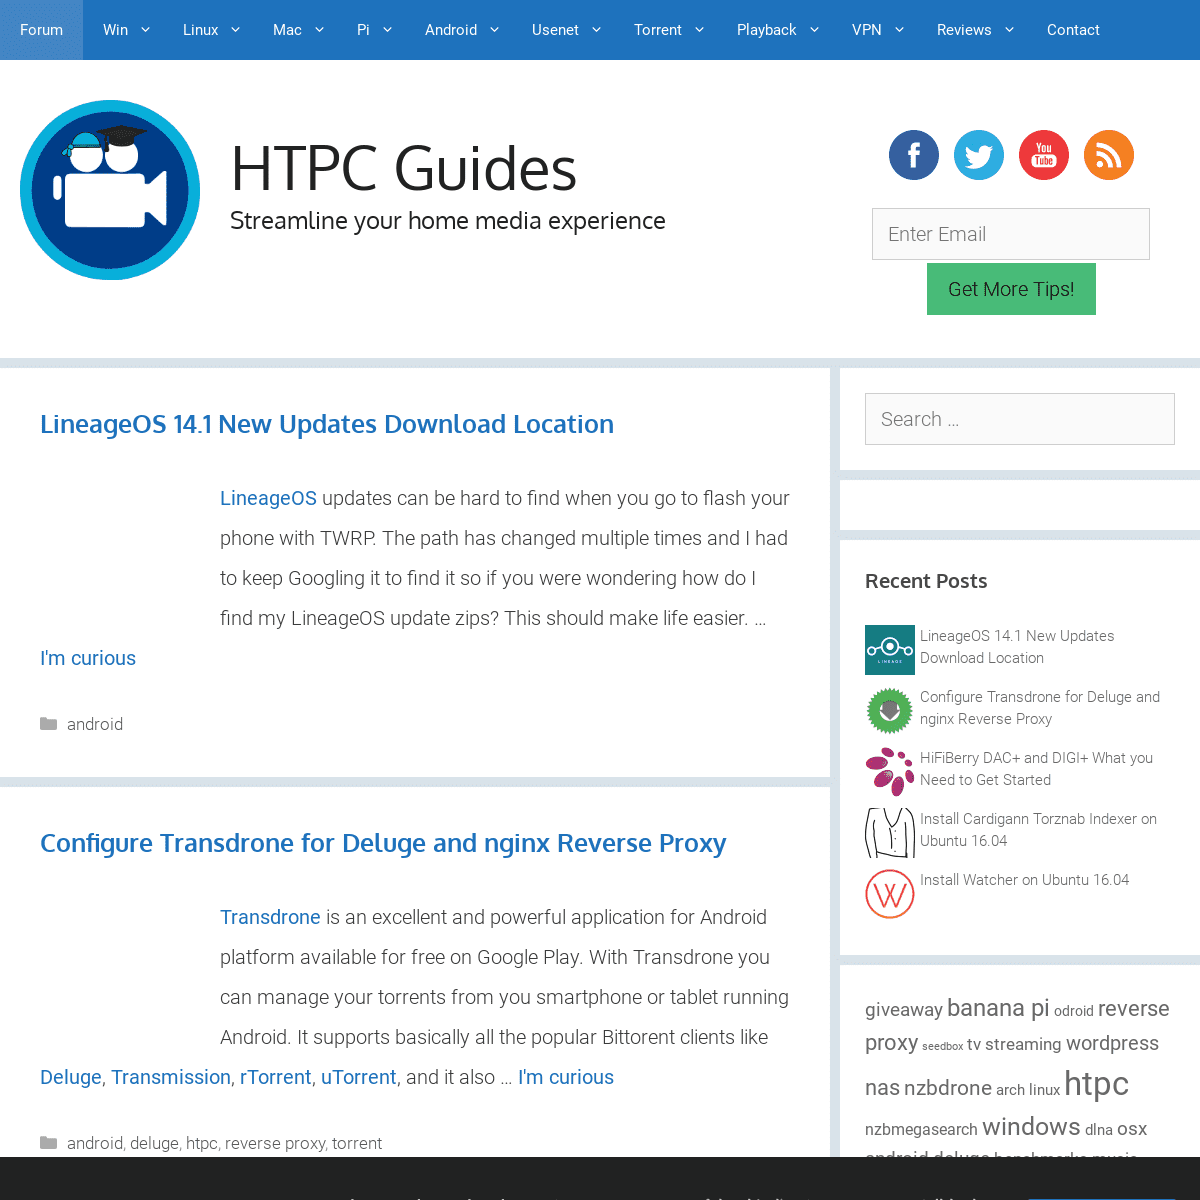 A complete backup of https://htpcguides.com